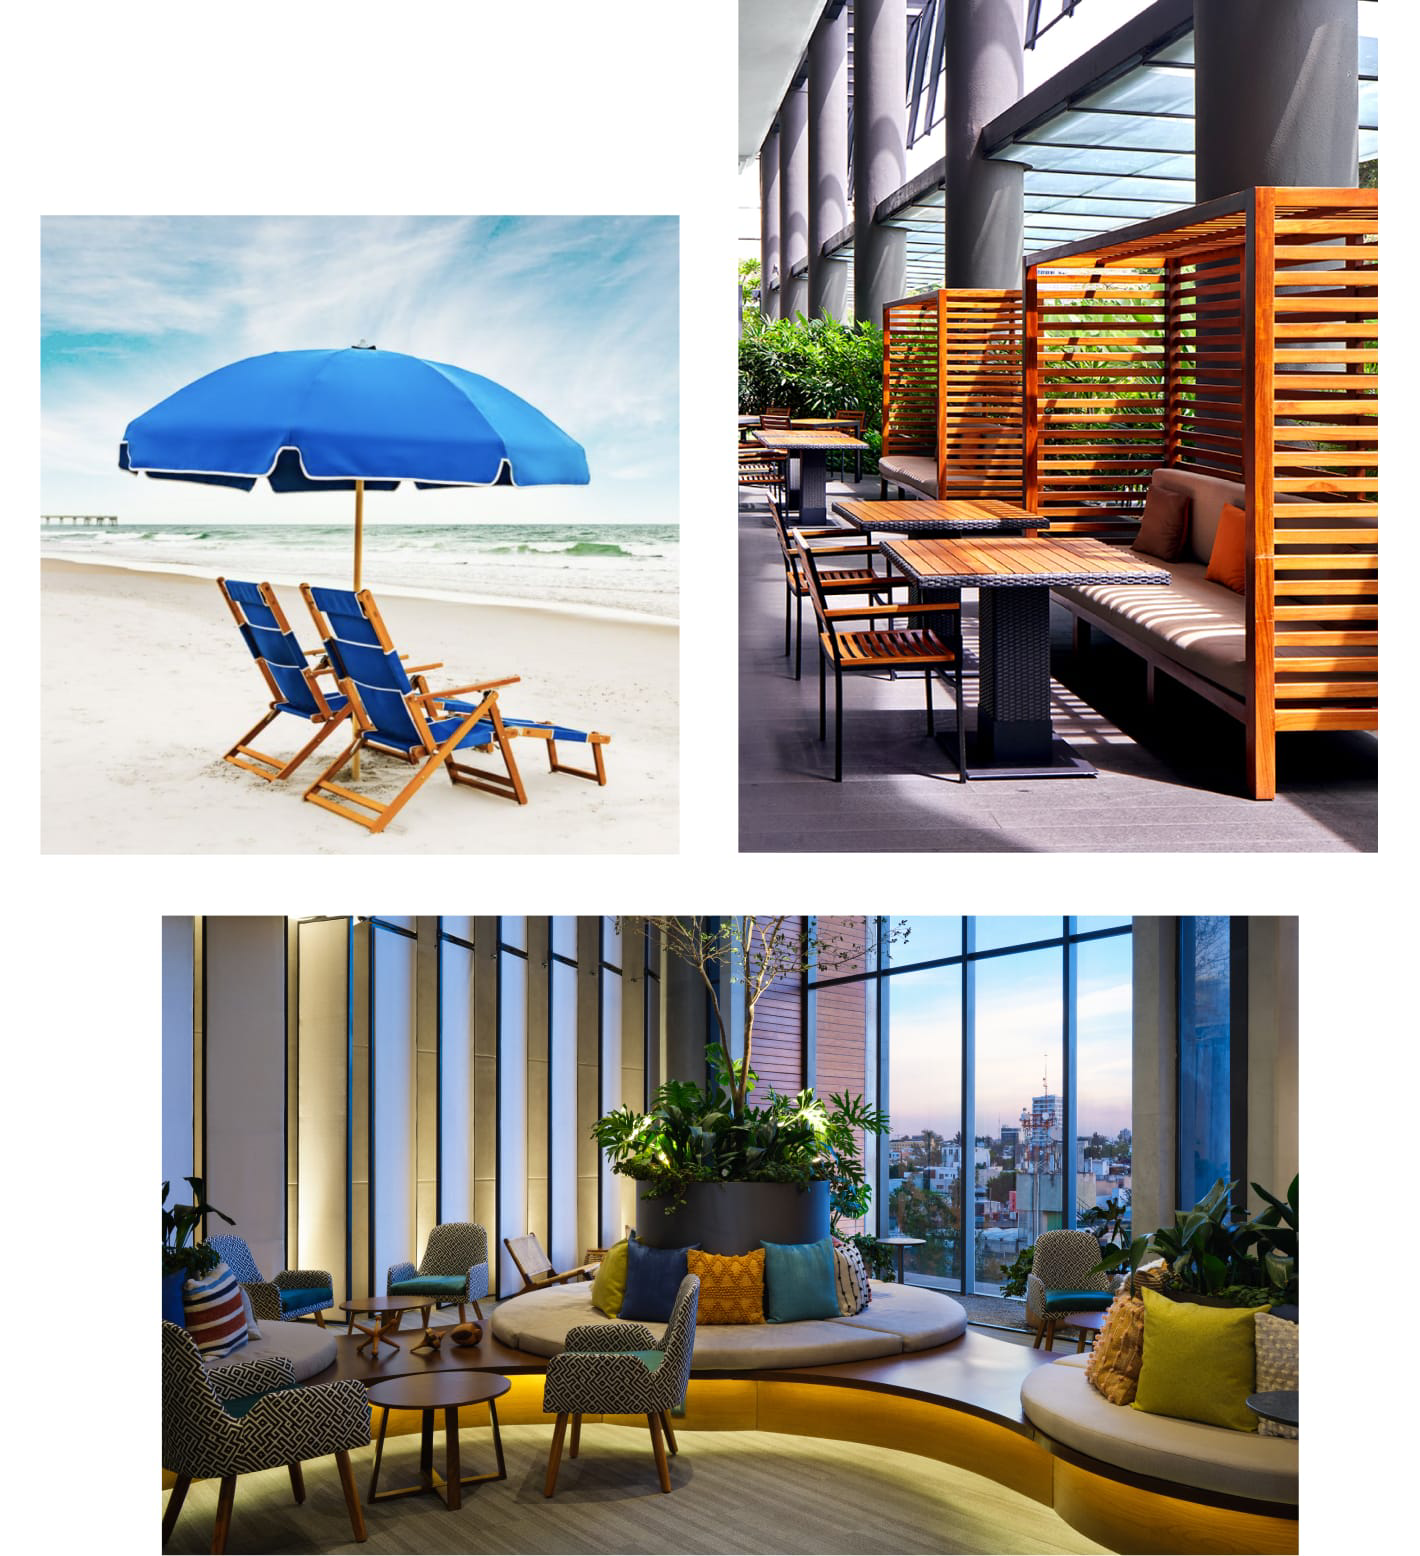 Cluster of images featuring an upscale hotel lounge, a sunny restaurant patio and private beach seating